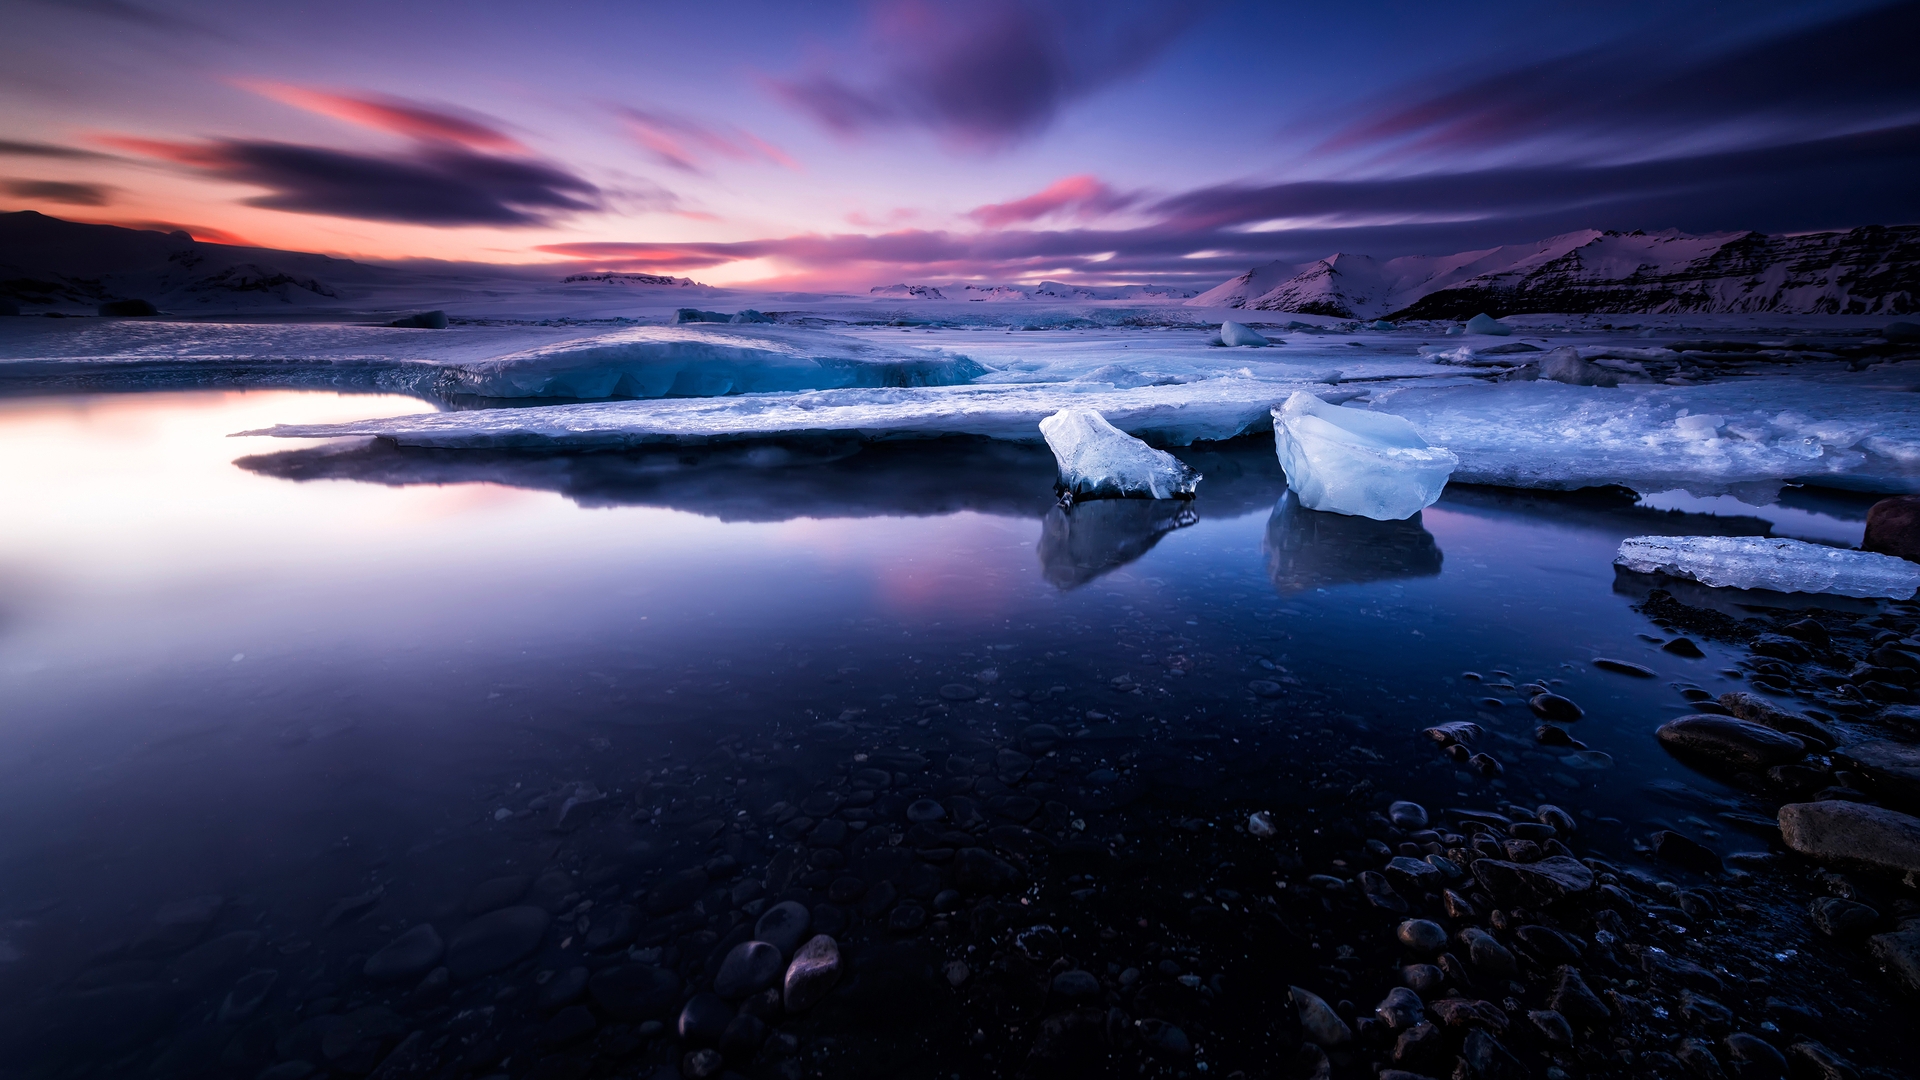 Image: Water, ice, shore, stone, mountains, sky